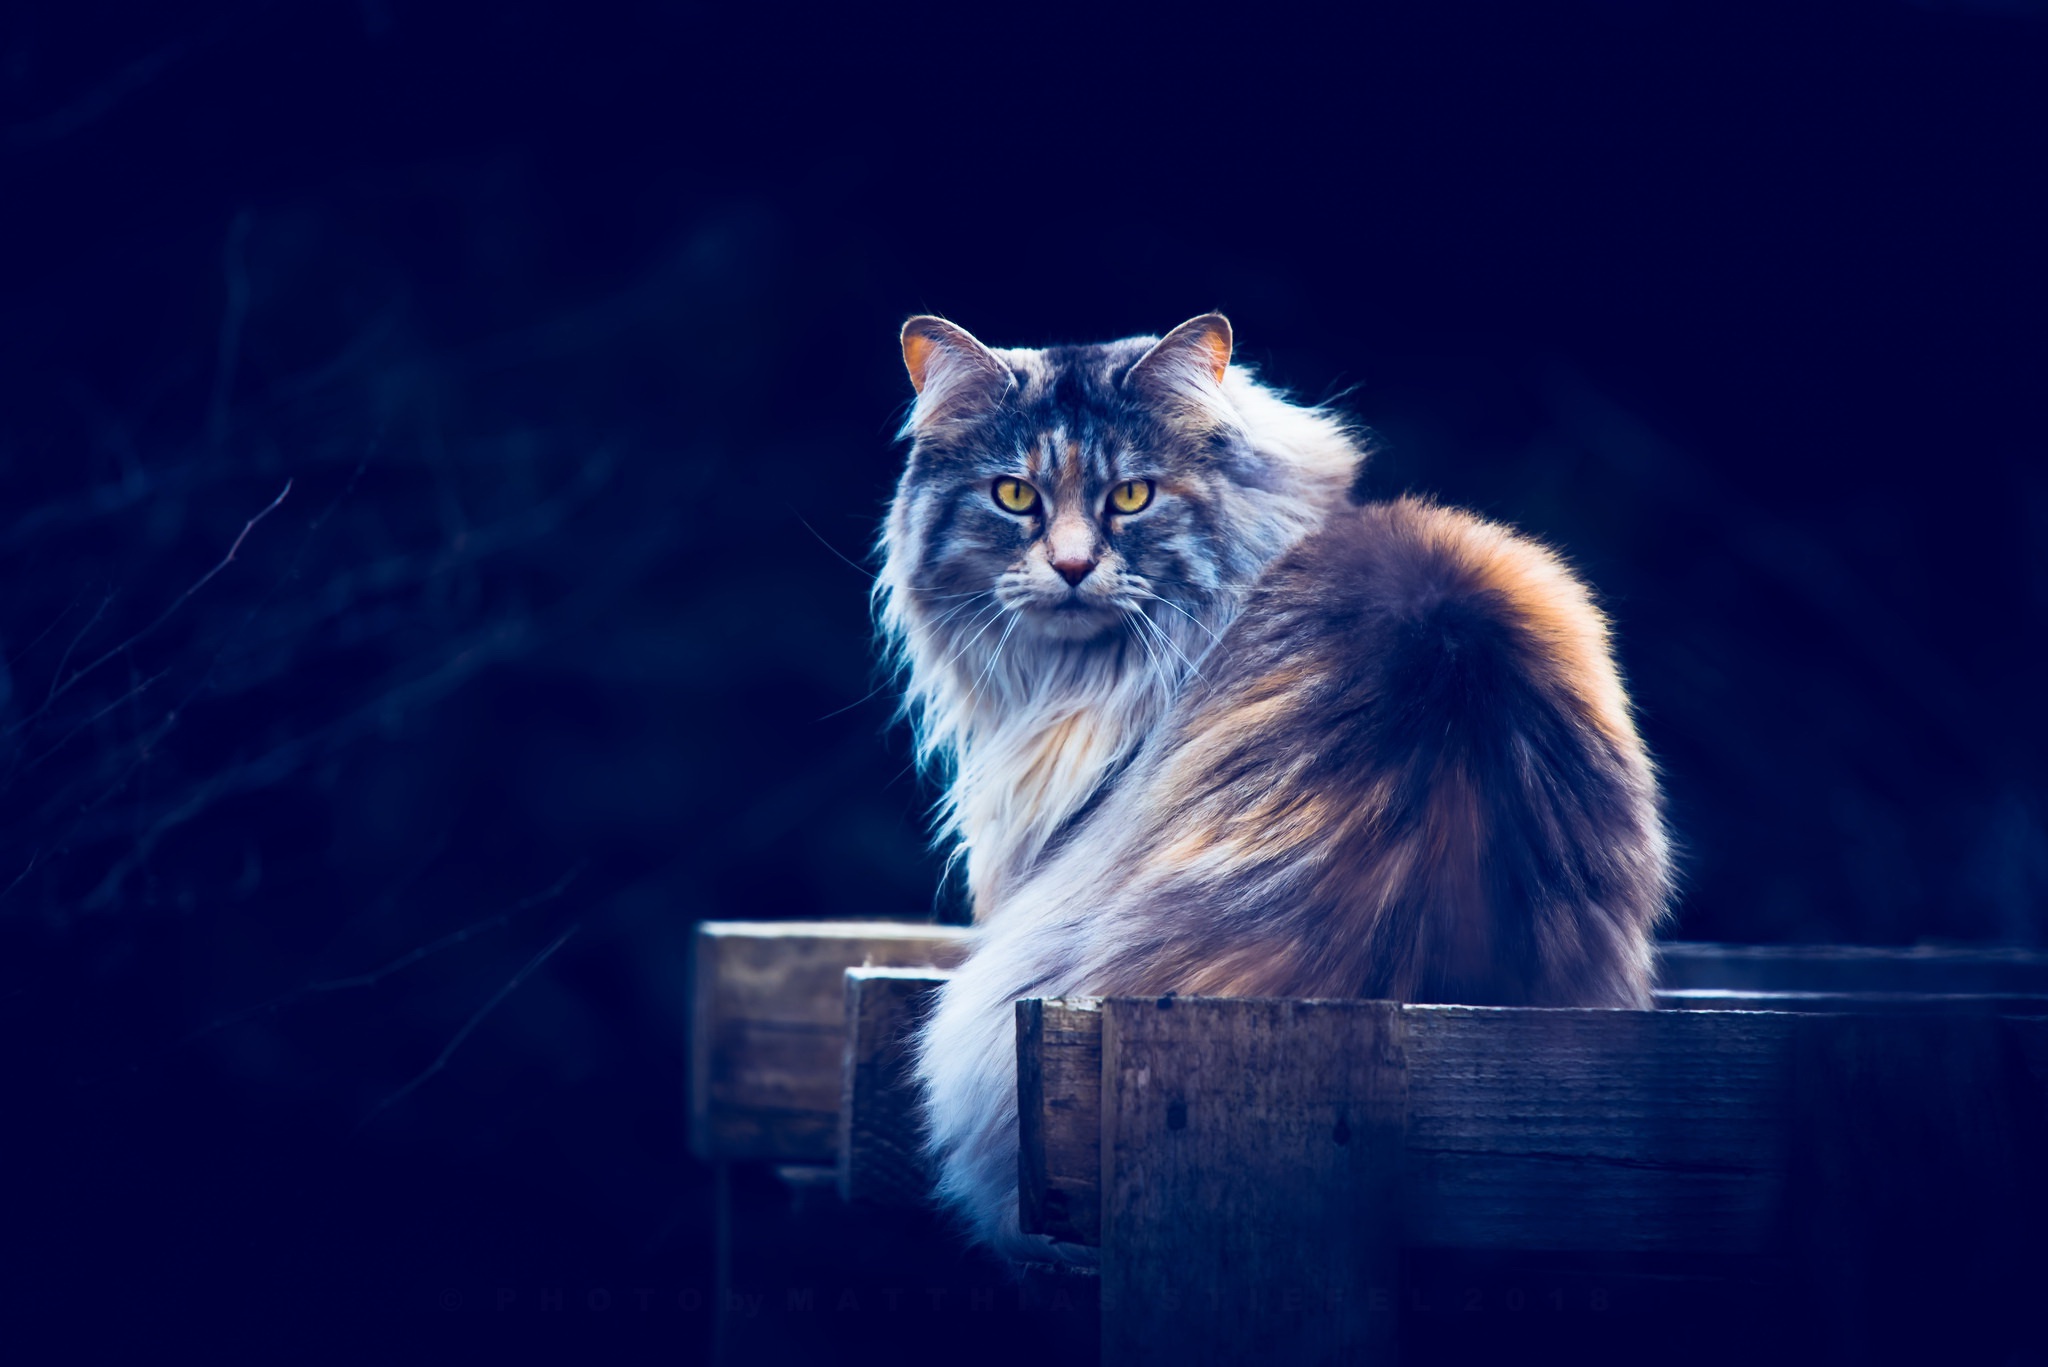 General 2048x1367 animals cats yellow eyes blue background